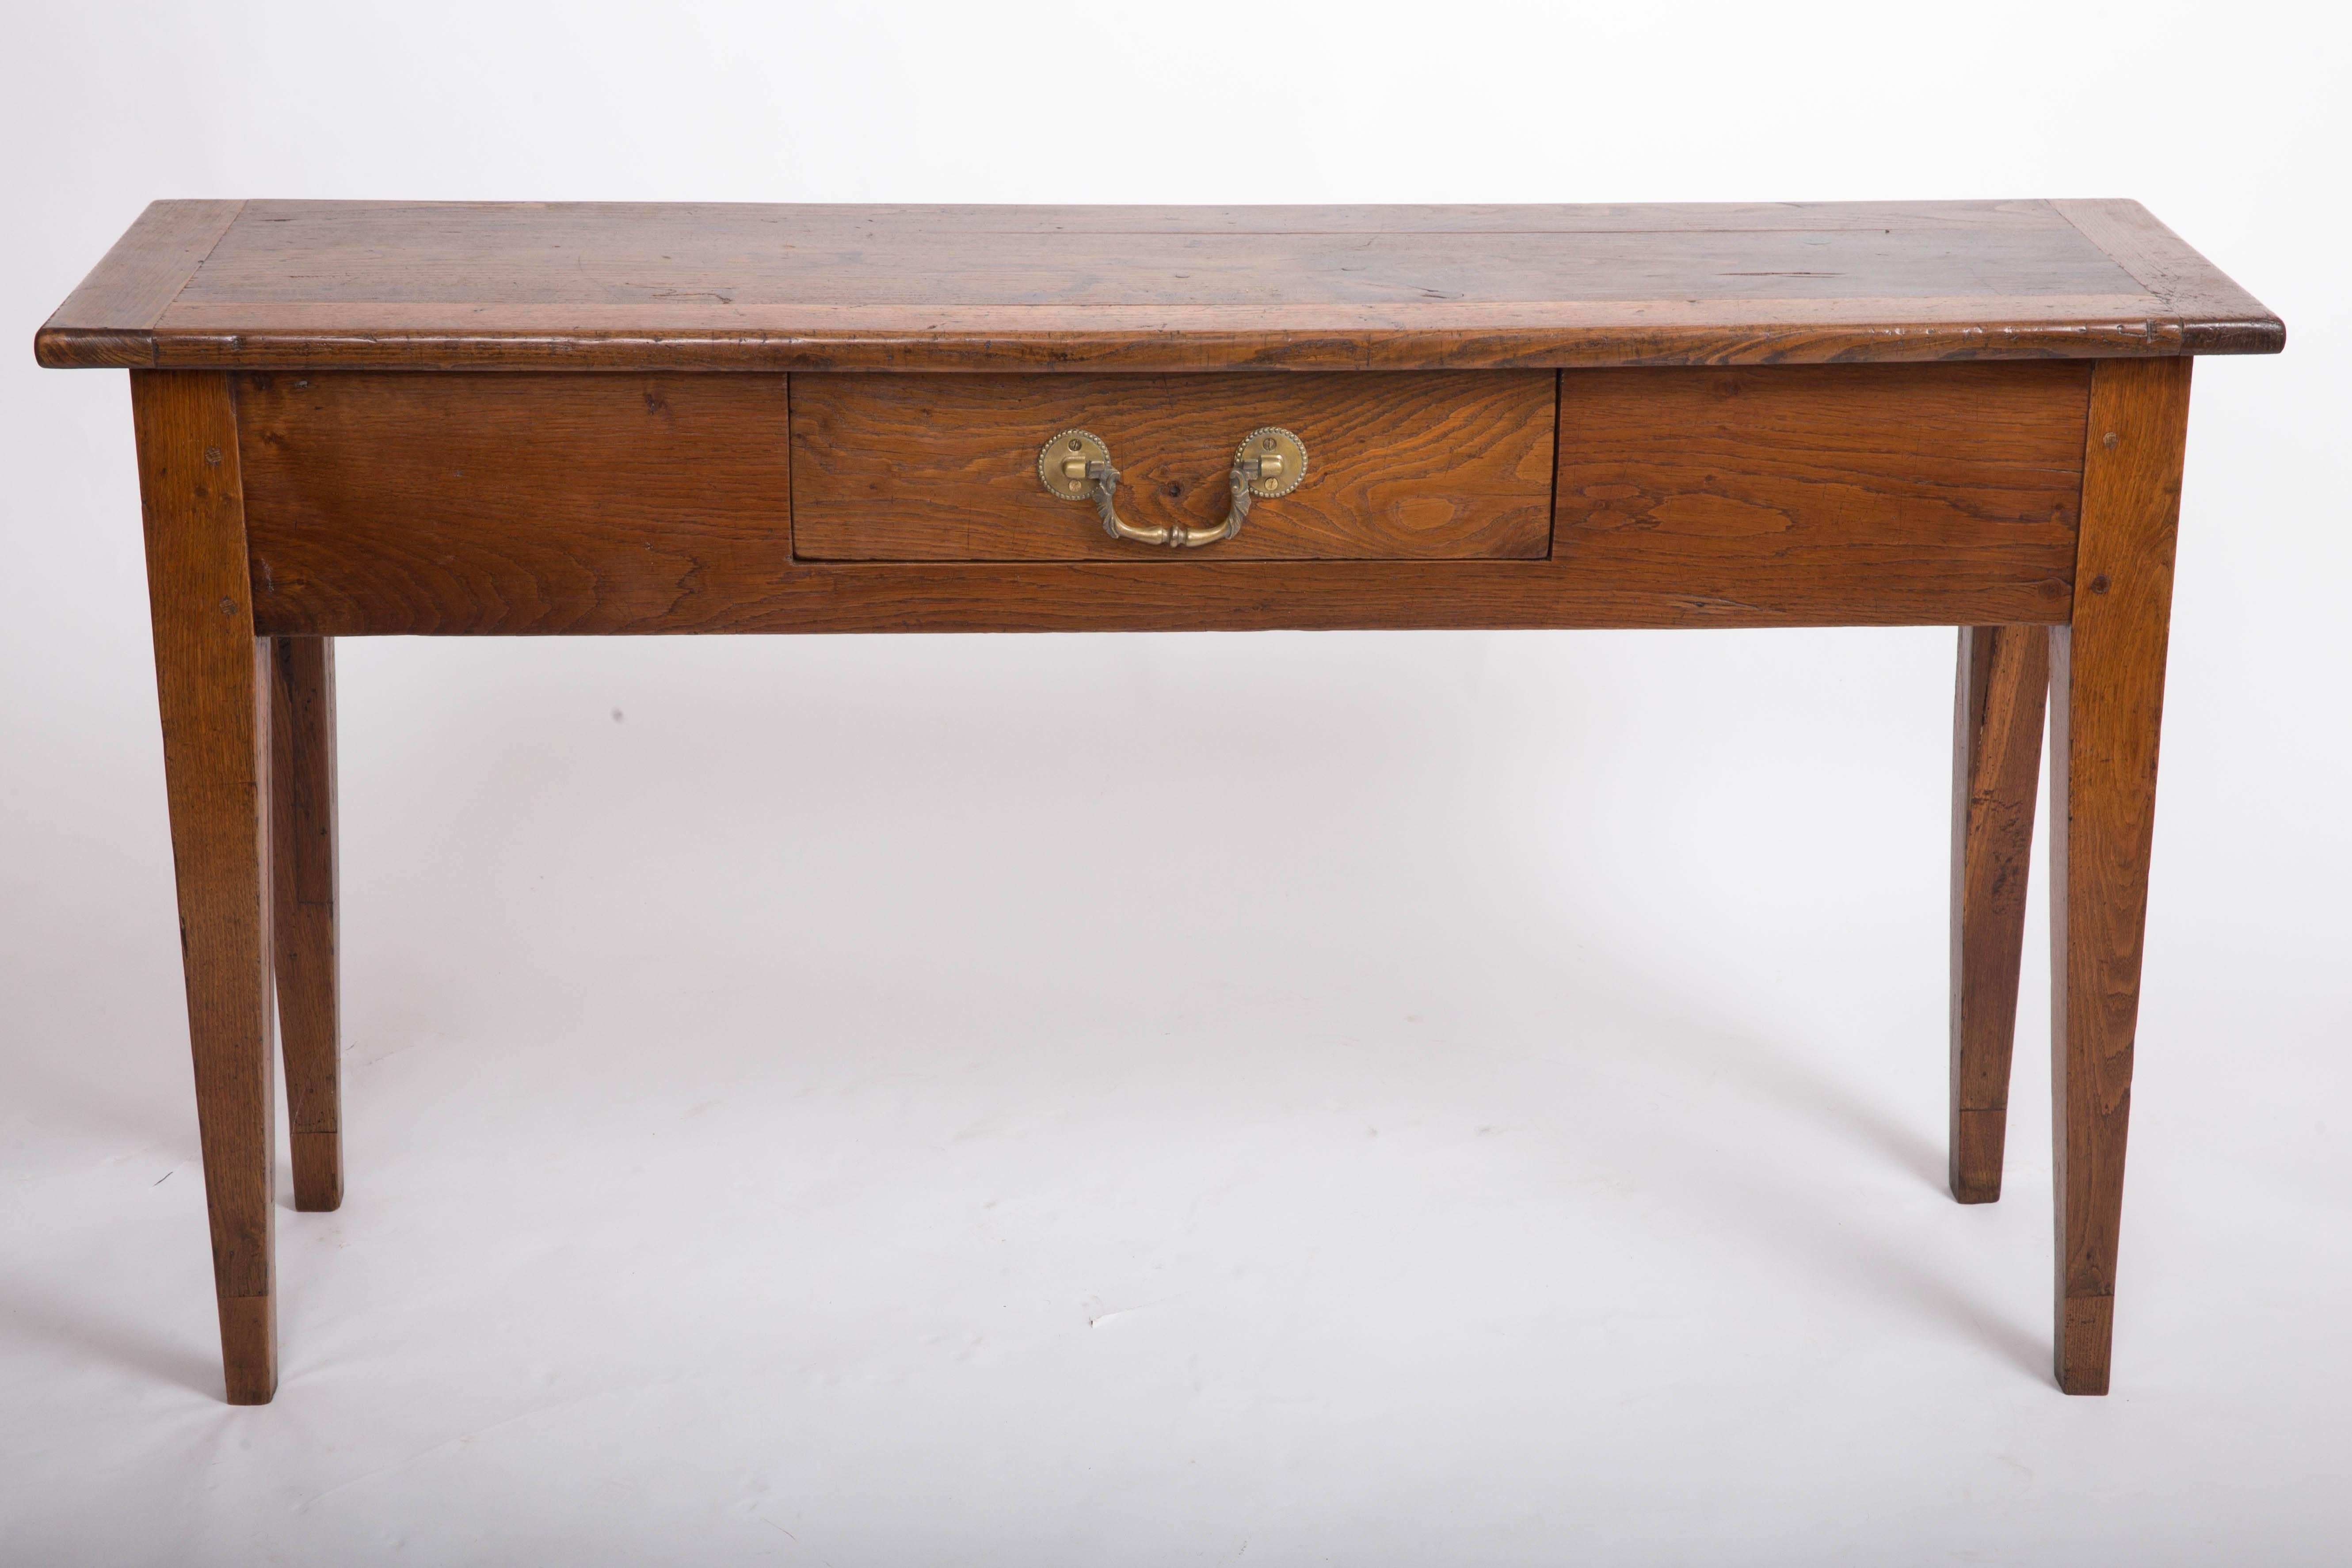 Unusual narrow oak server, top boarded with chestnut, one drawer with original iron pull, tapered legs.